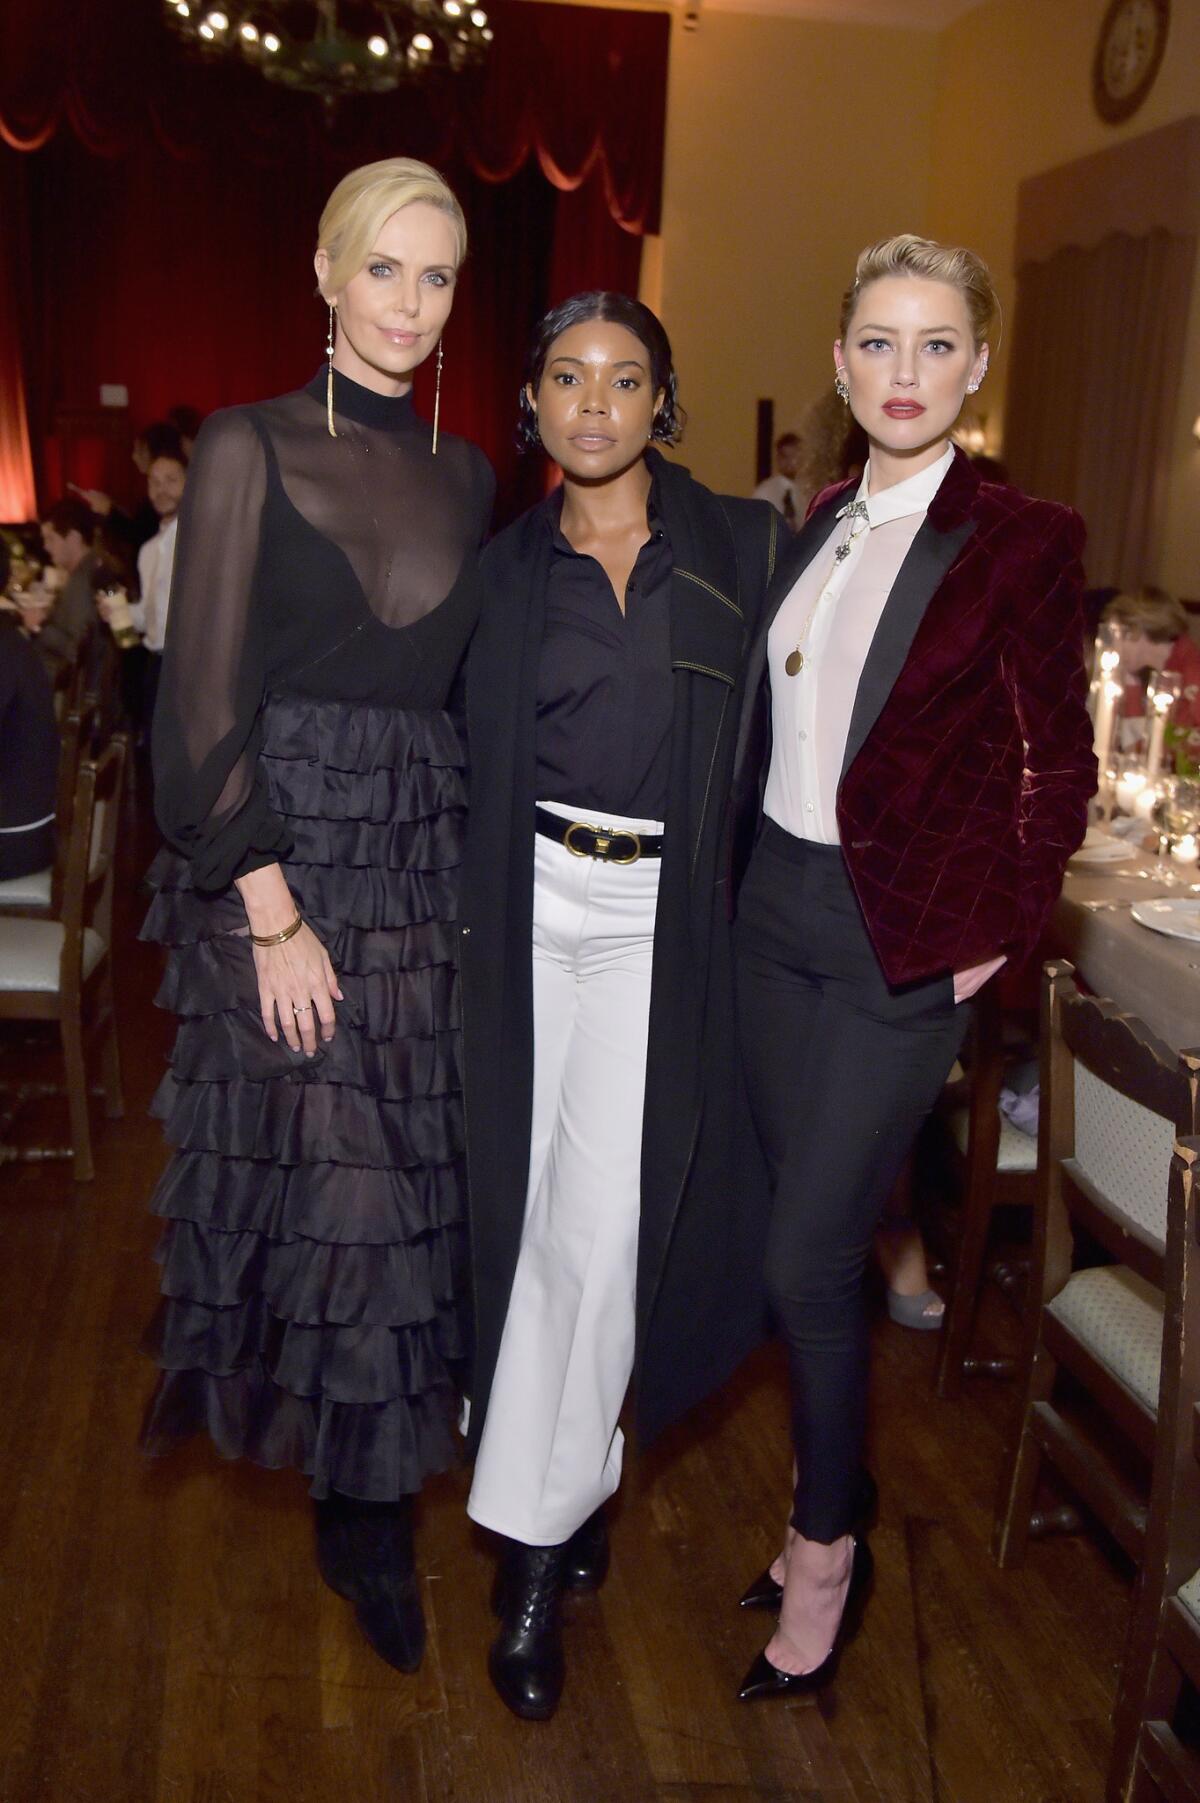 From left, Charlize Theron, Gabrielle Union and Amber Heard.